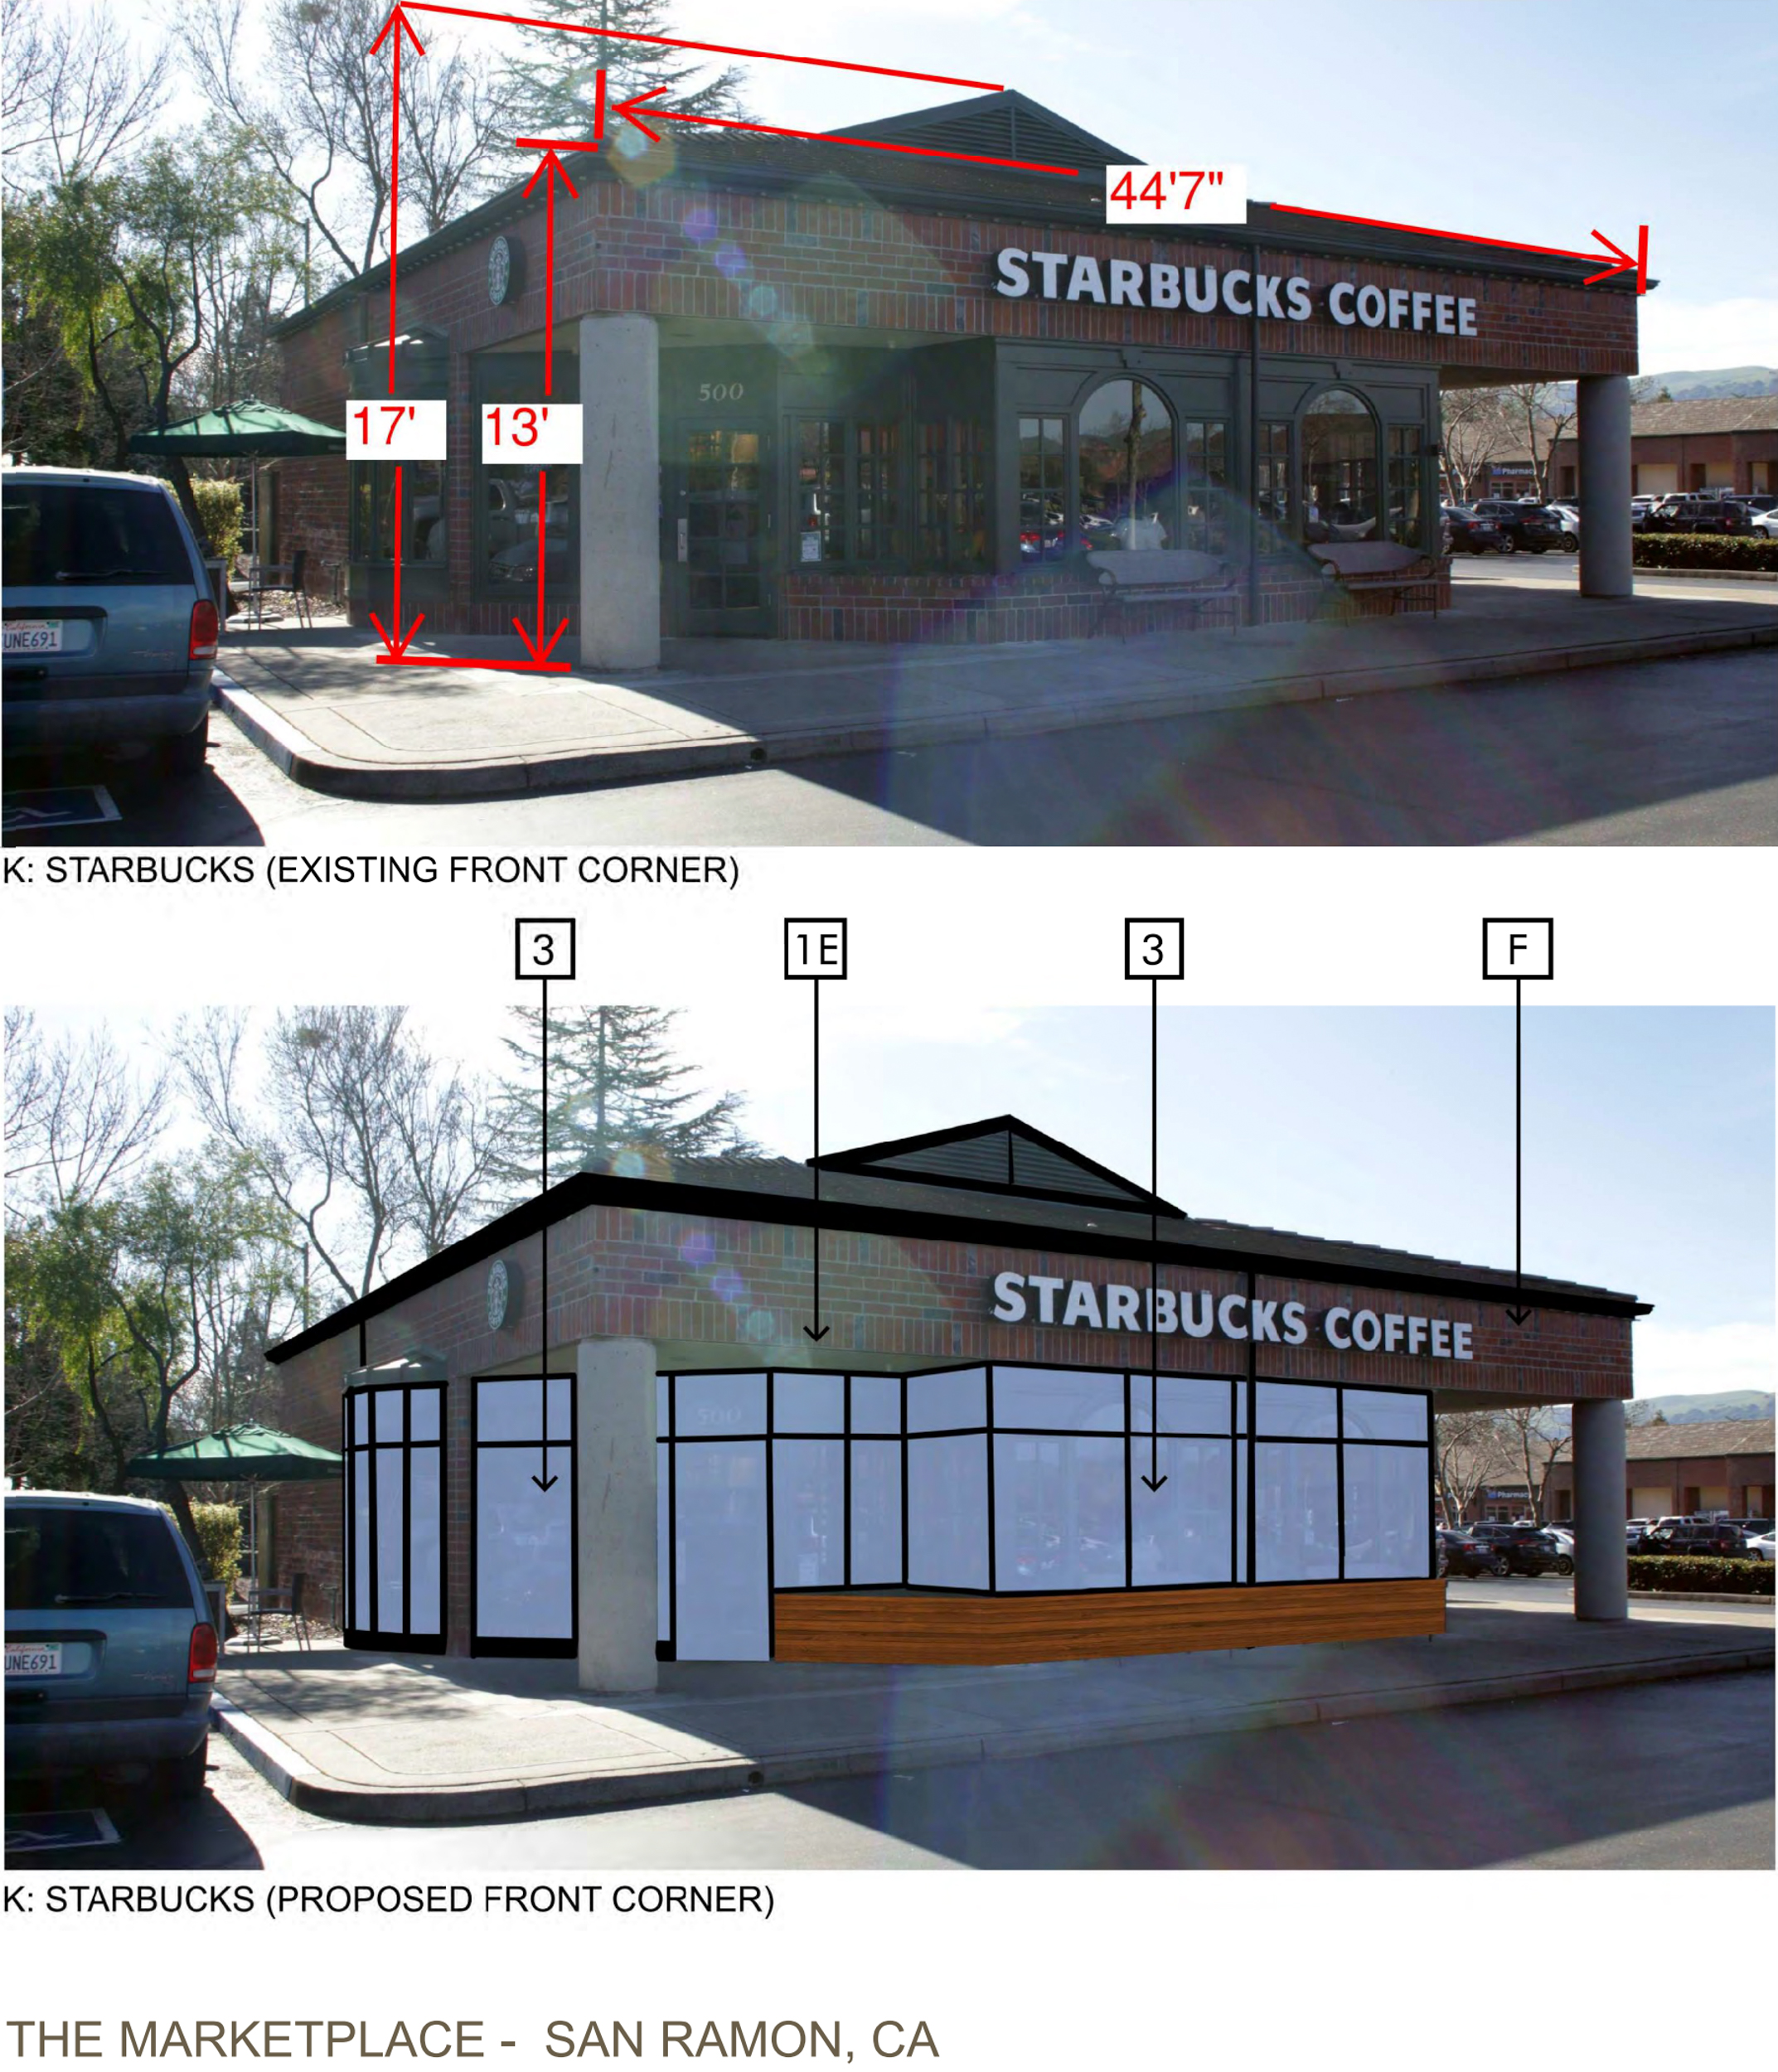 130 Market Place planned changes to the Starbucks, illustration by KTGY Architects